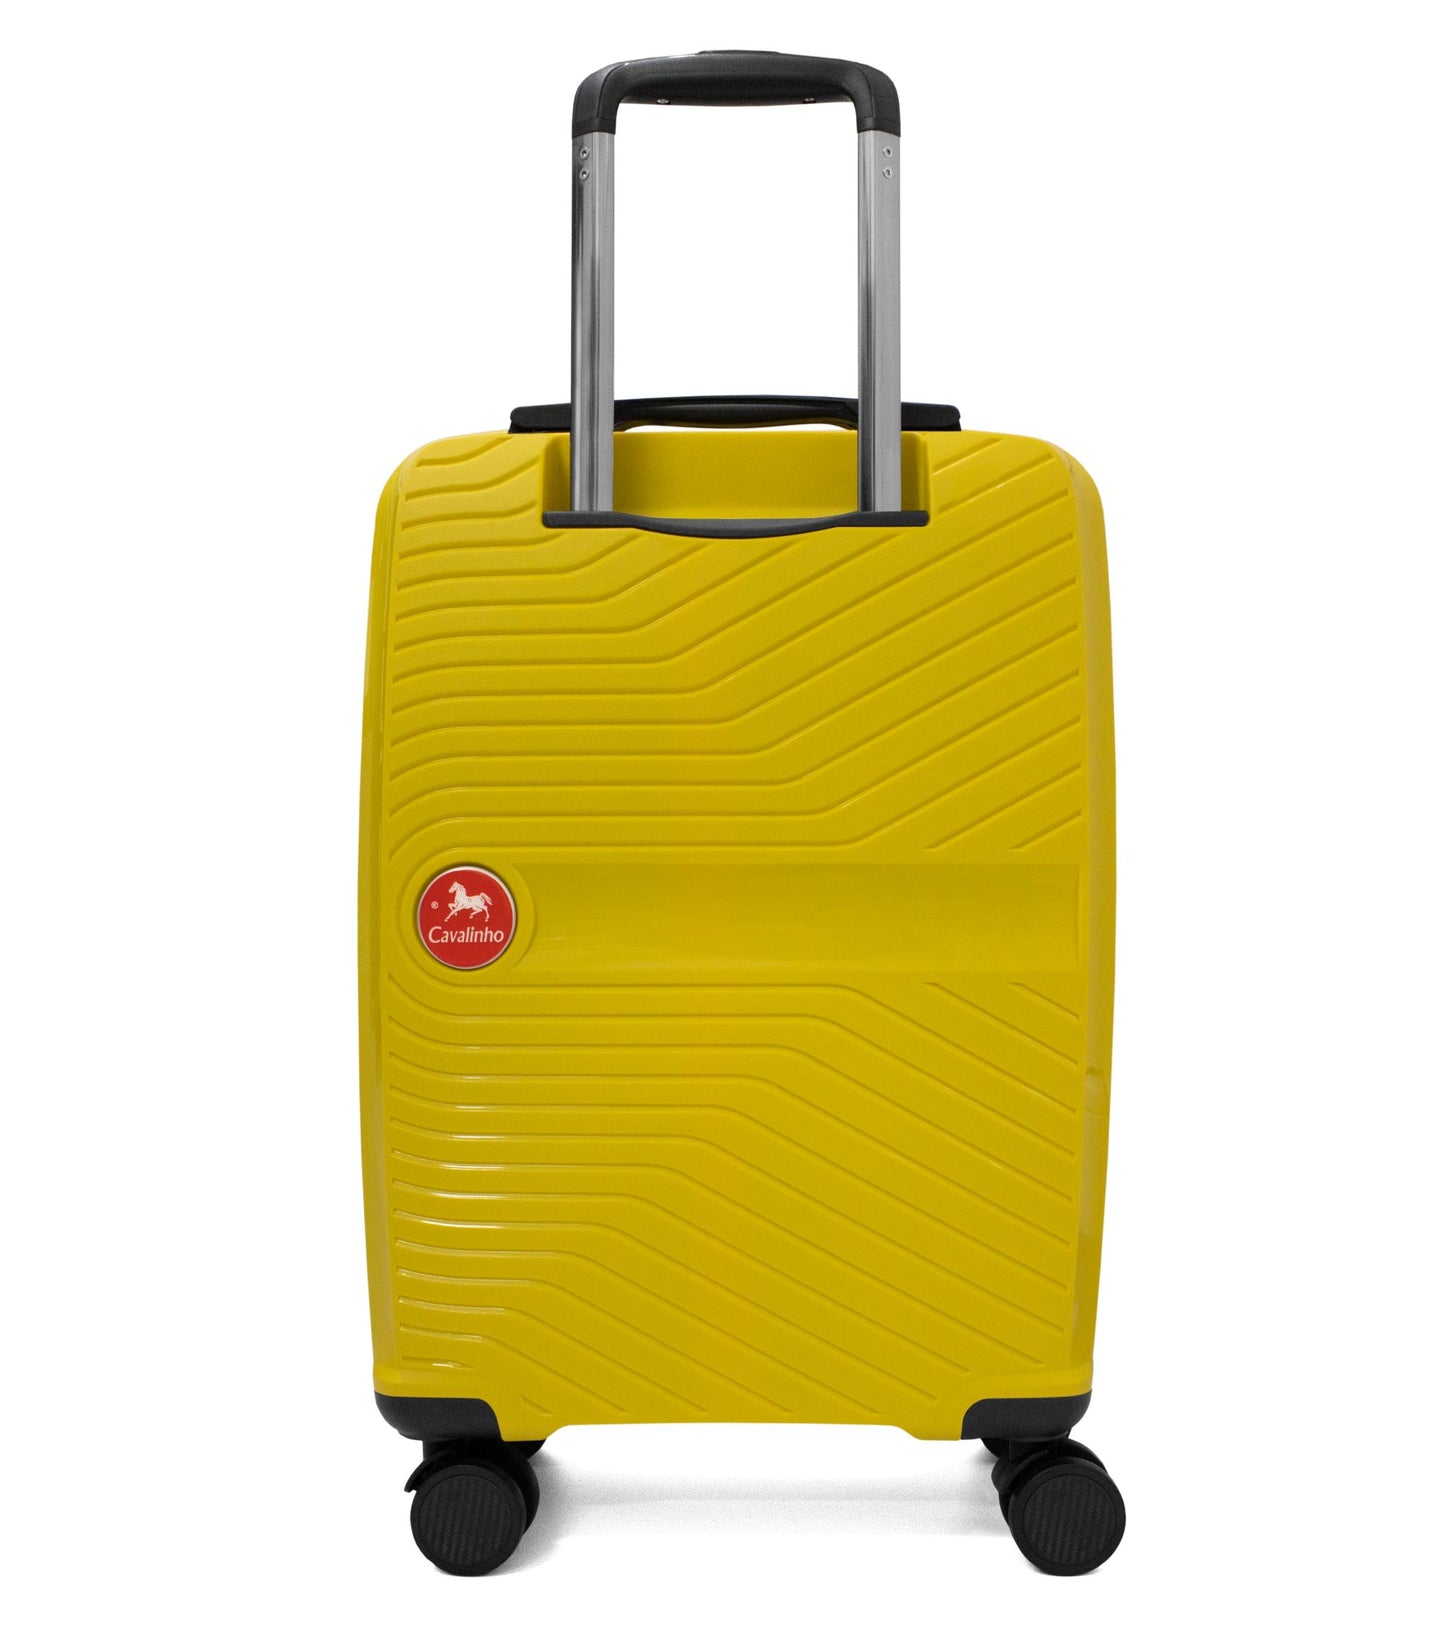 Cavalinho Colorful Carry-on Hardside Luggage (19") - 19 inch Yellow - 68020004.08.19_3